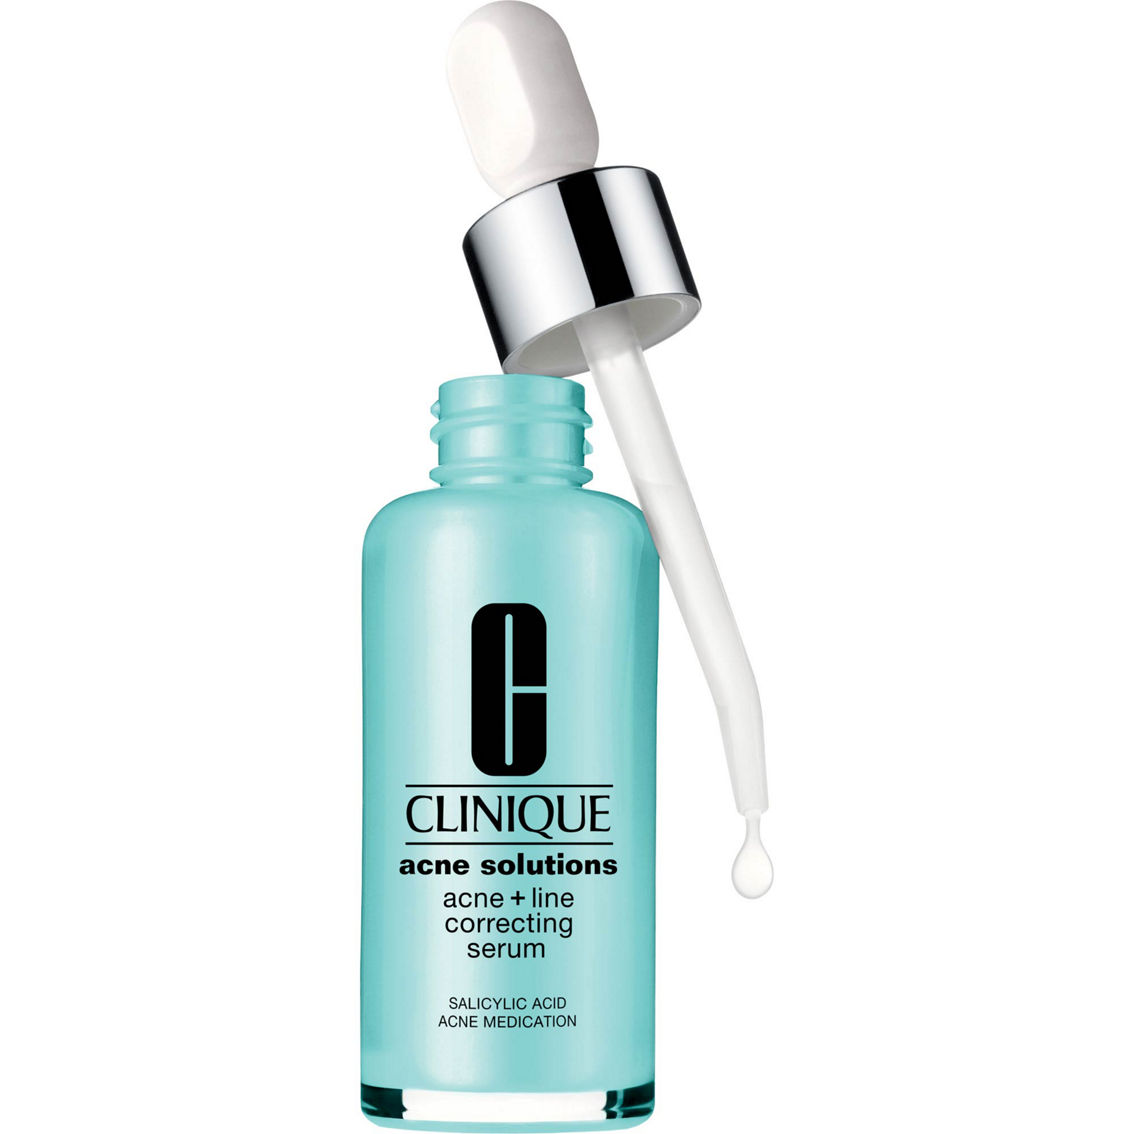 Clinique Acne Solutions™ Acne + Line Correcting Serum - Image 2 of 7